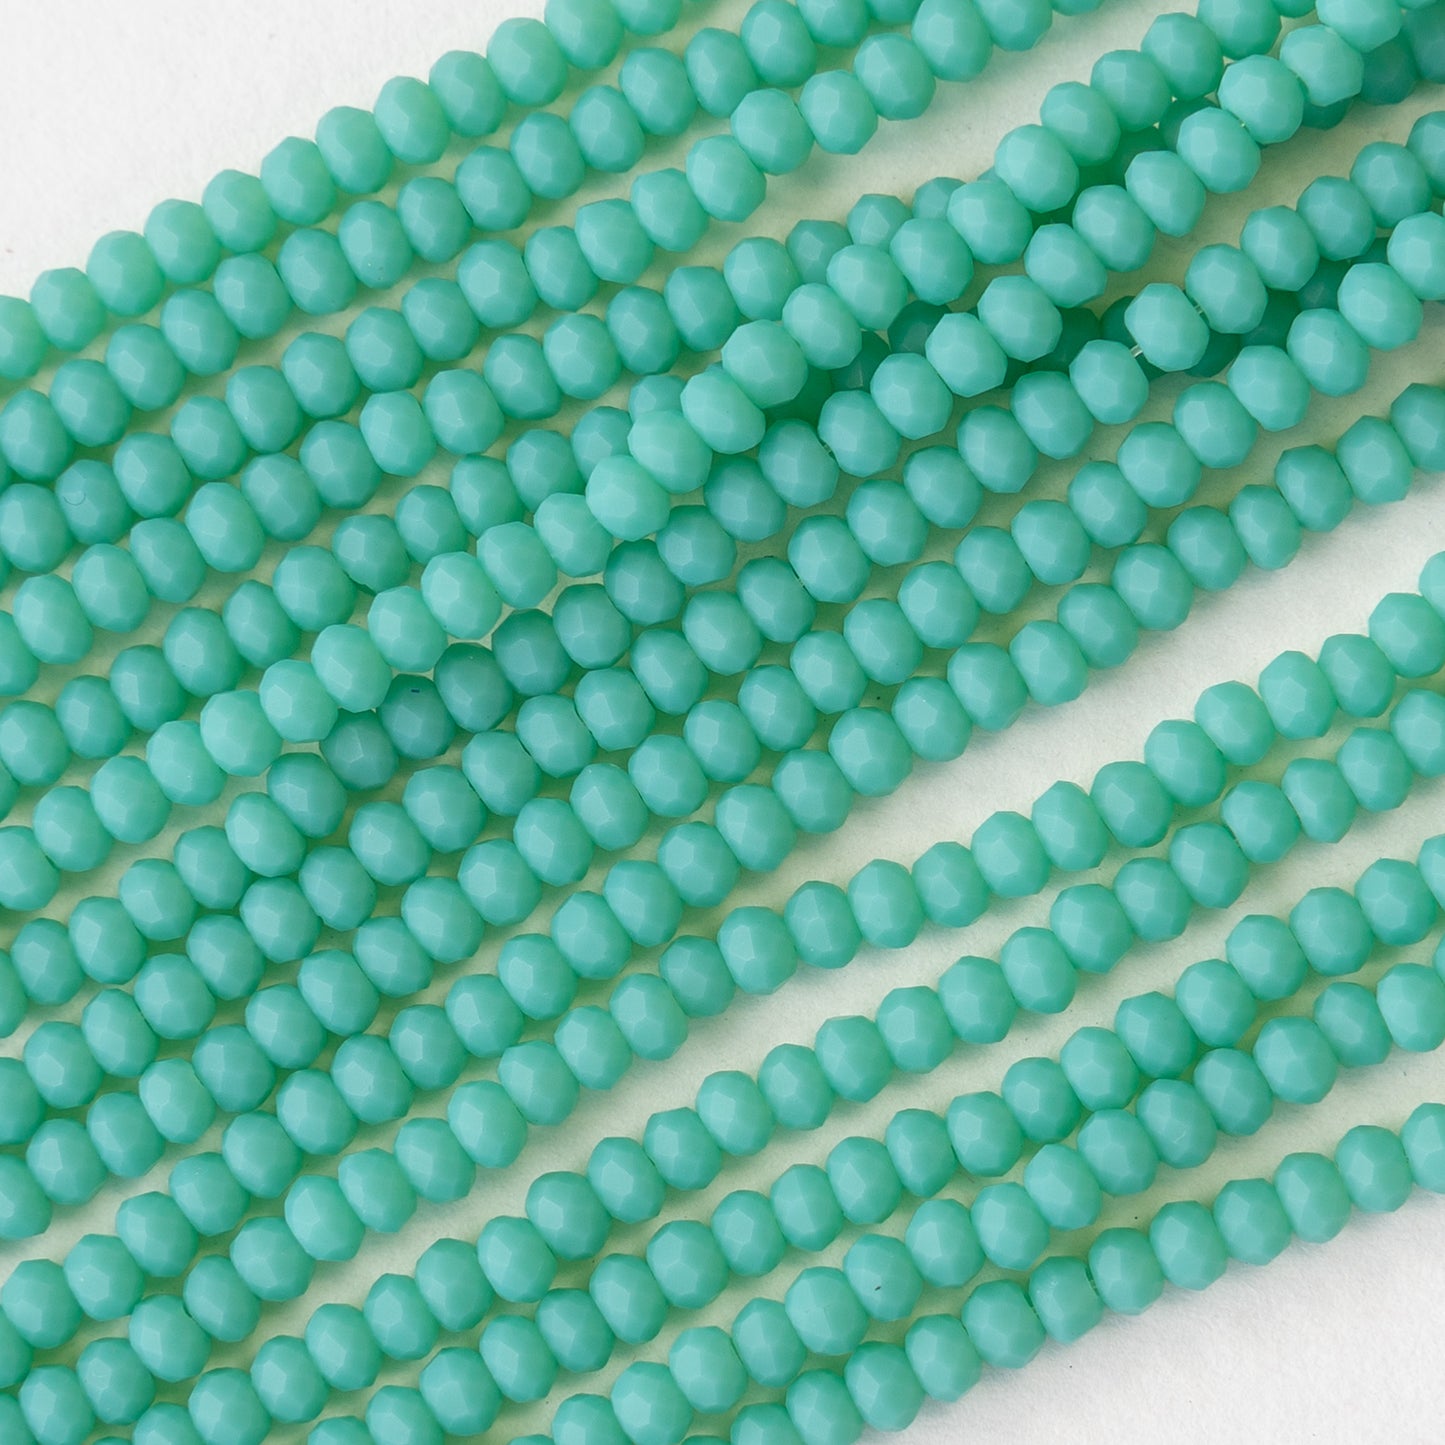 3x2mm Faceted Glass Rondelle Beads - Turquoise - 16 Inches ~ 200 Beads